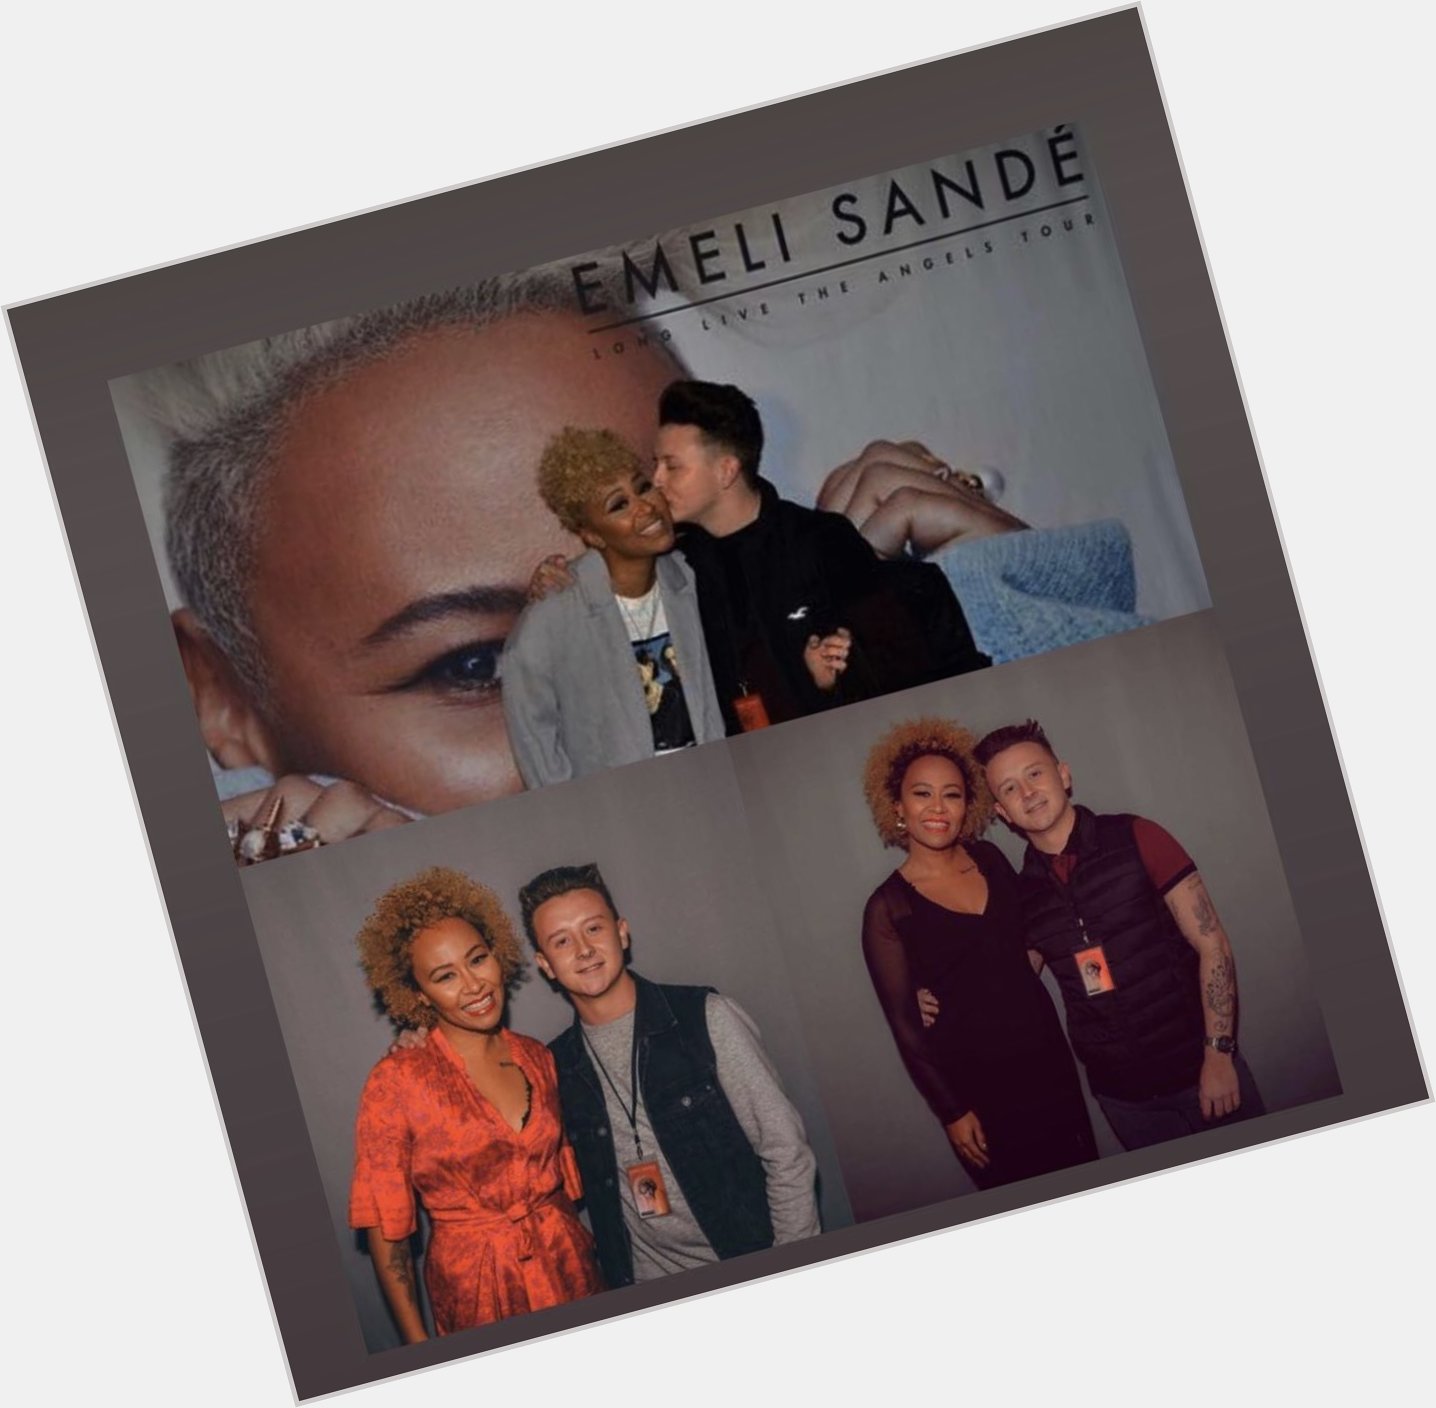 Happy Birthday Emeli Sandé Thank you for helping me through the rough times with your music! 